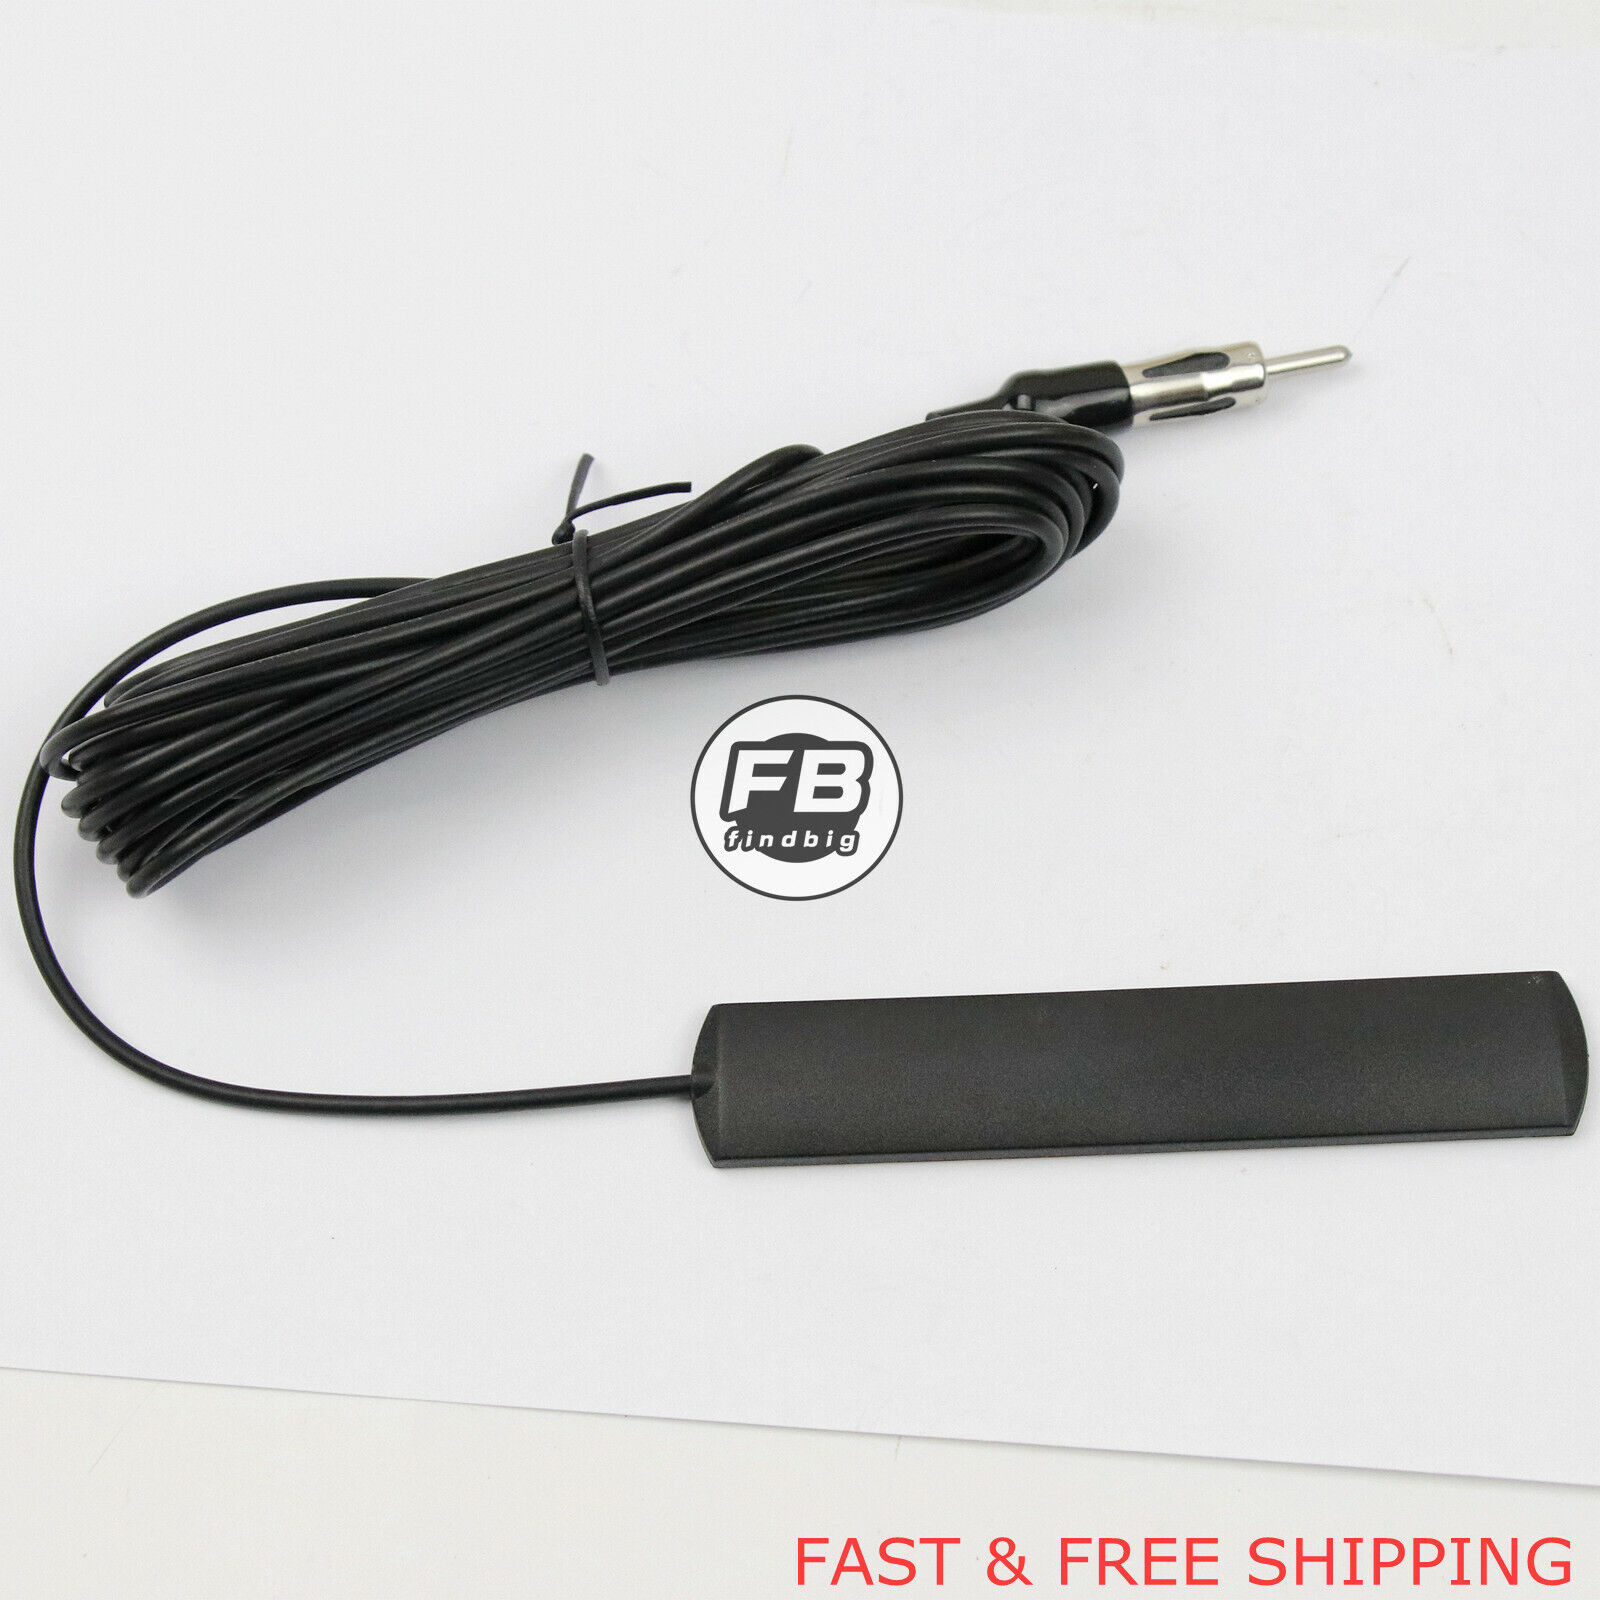 Car Radio Stereo Hidden Antenna Stealth FM AM For Vehicle Truck Motorcycle Boat